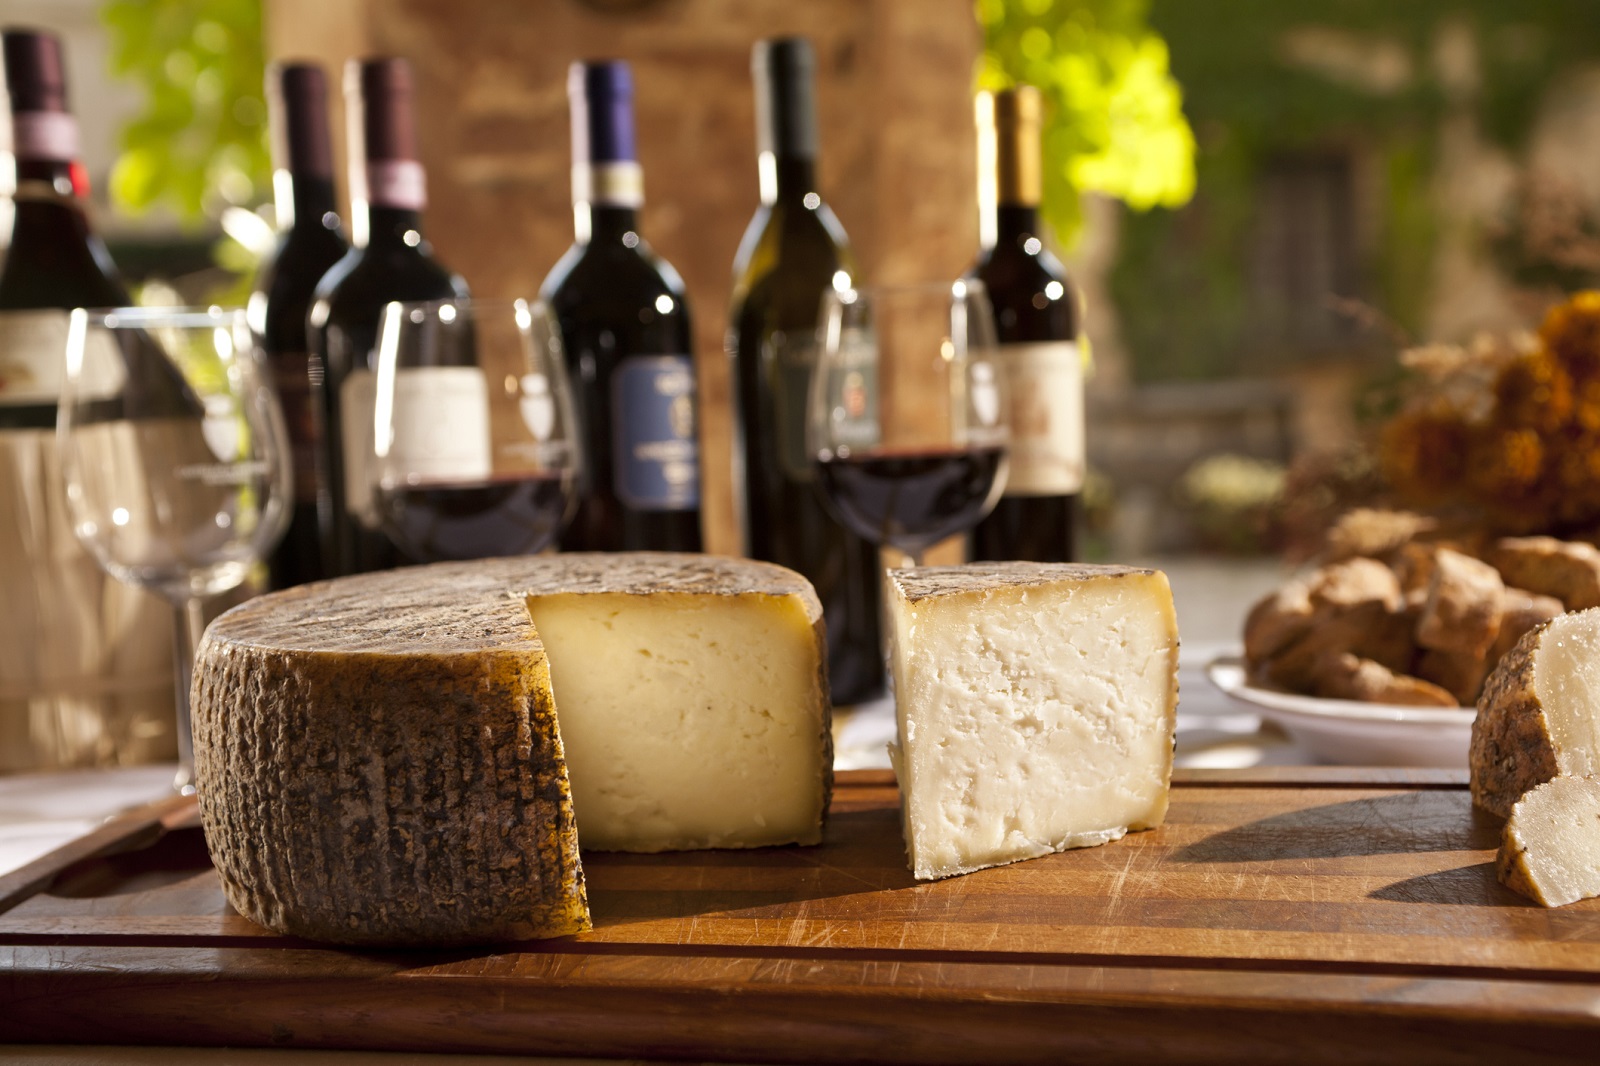 Composition of home made cheese and wine bottles from Tuscany, Italy.